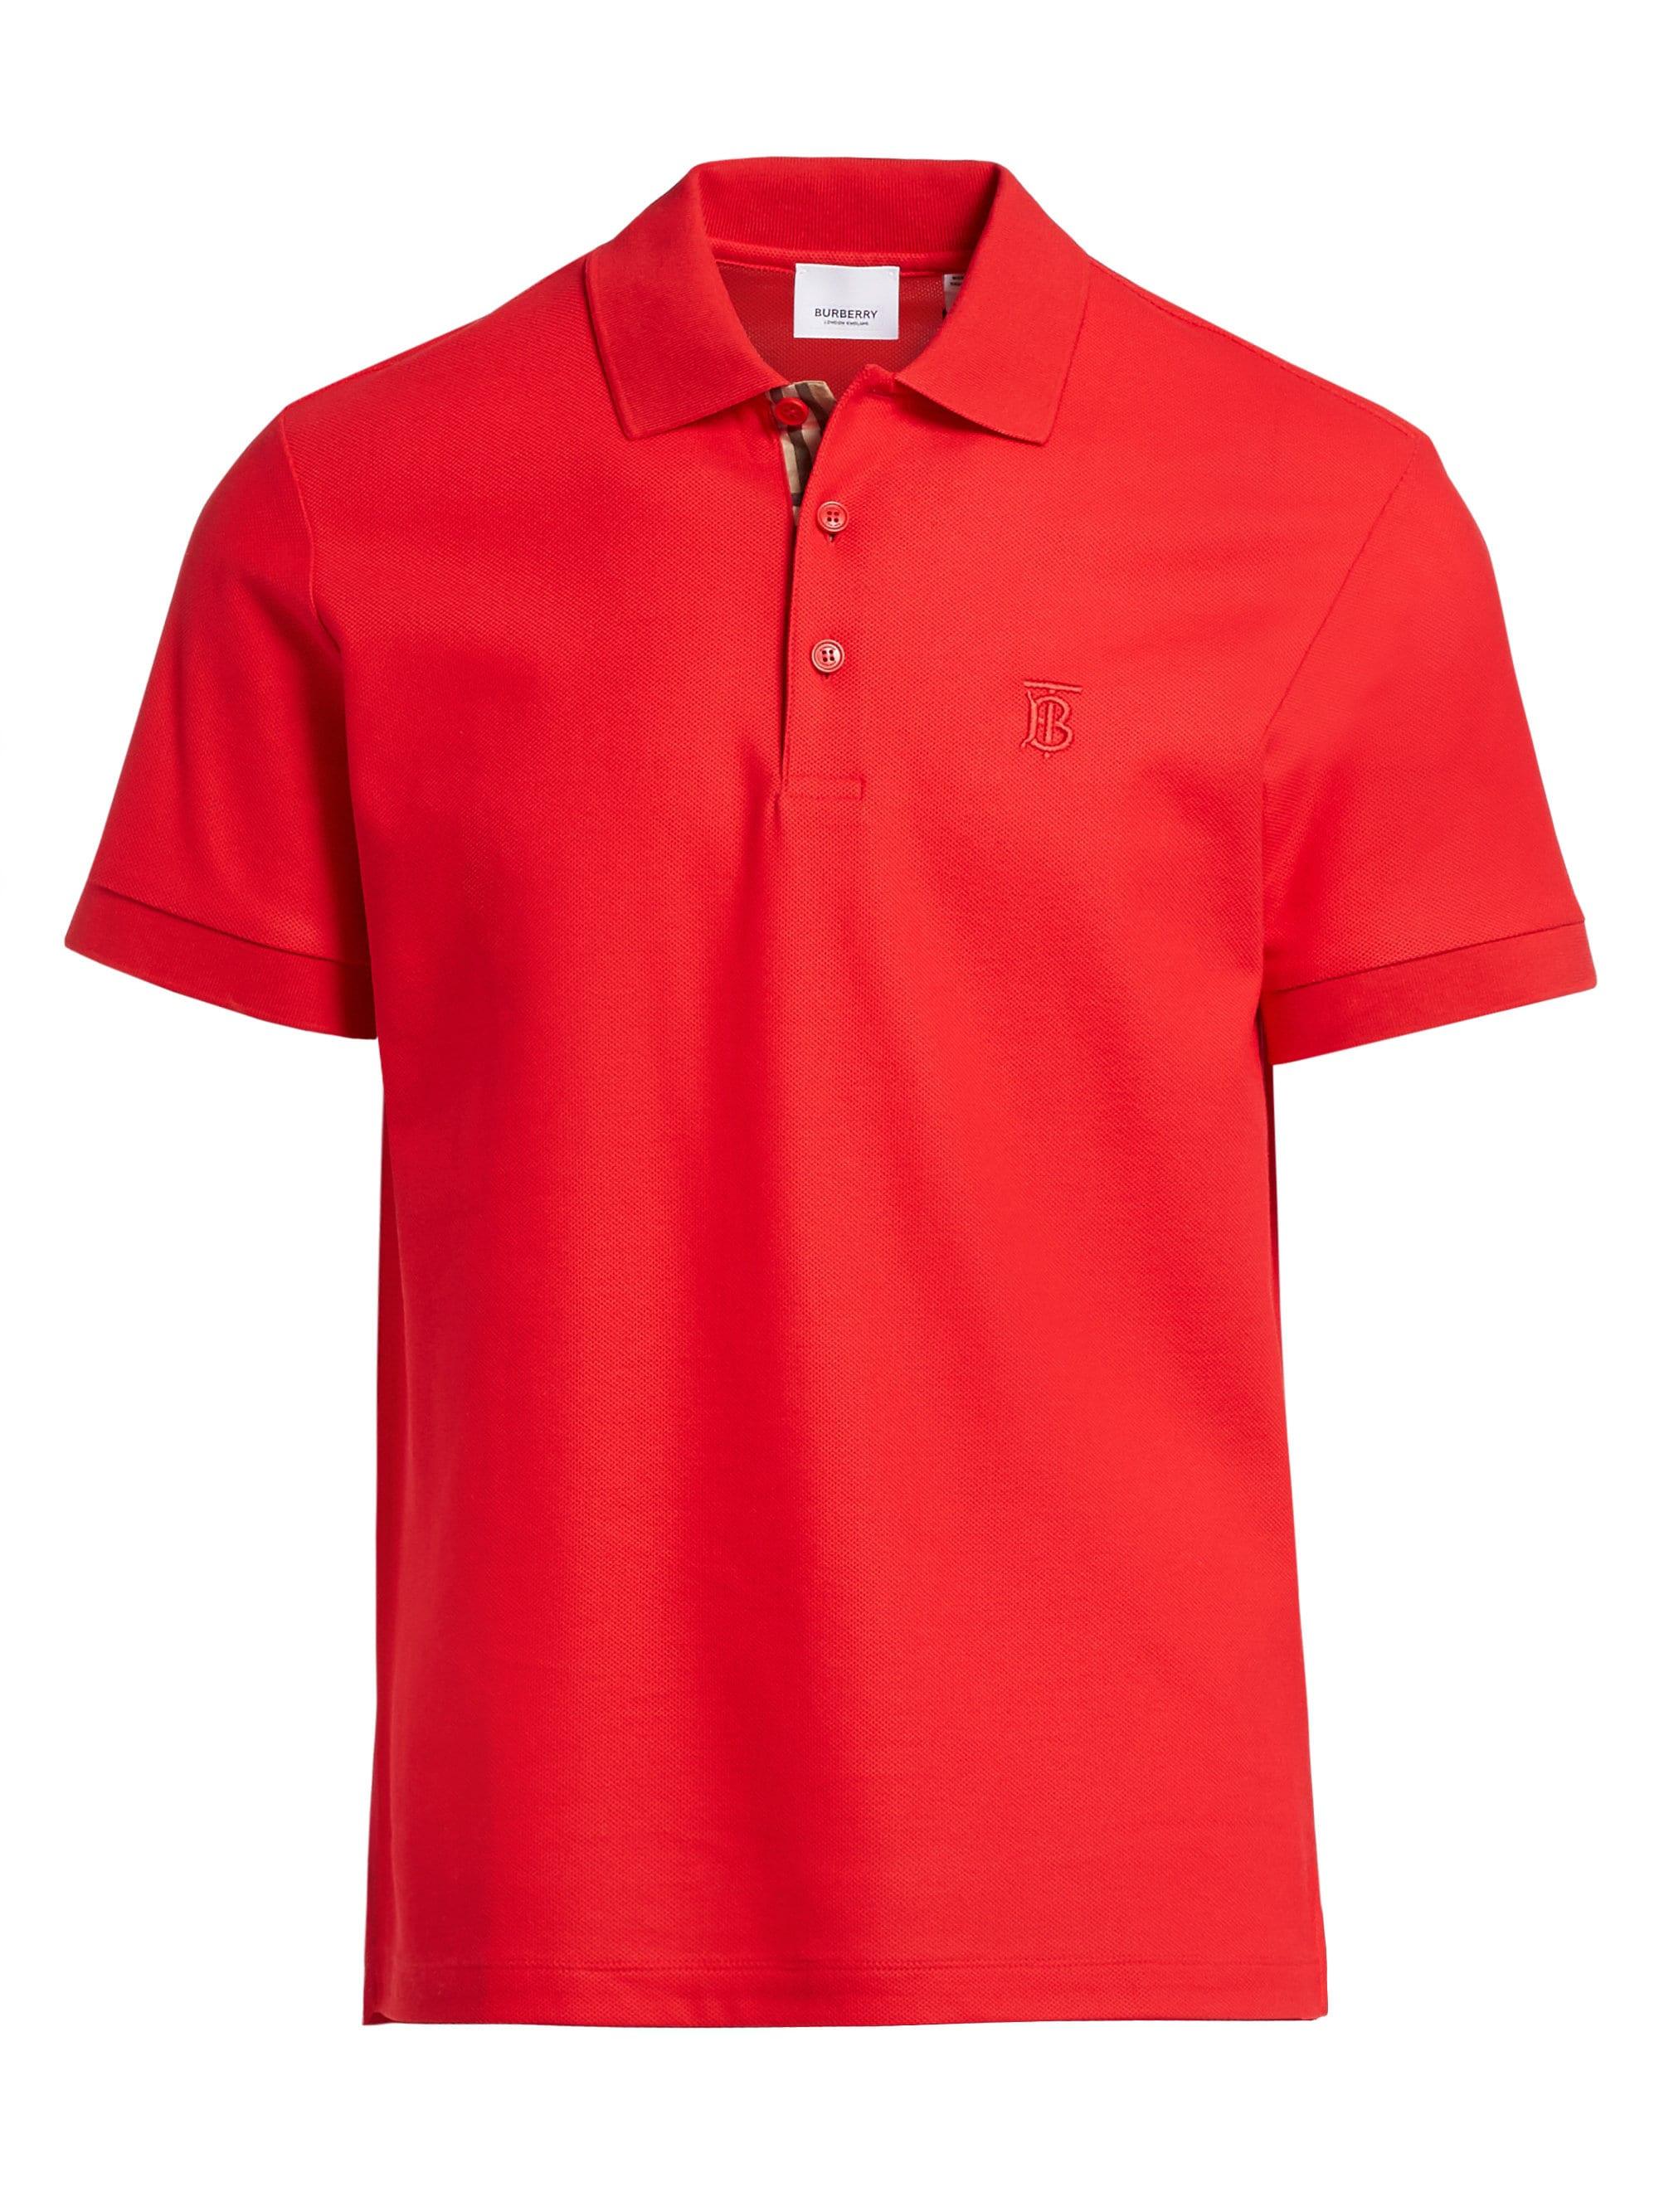 Burberry Men's Eddie Core Polo Shirt - Bright Red in Red for Men - Lyst